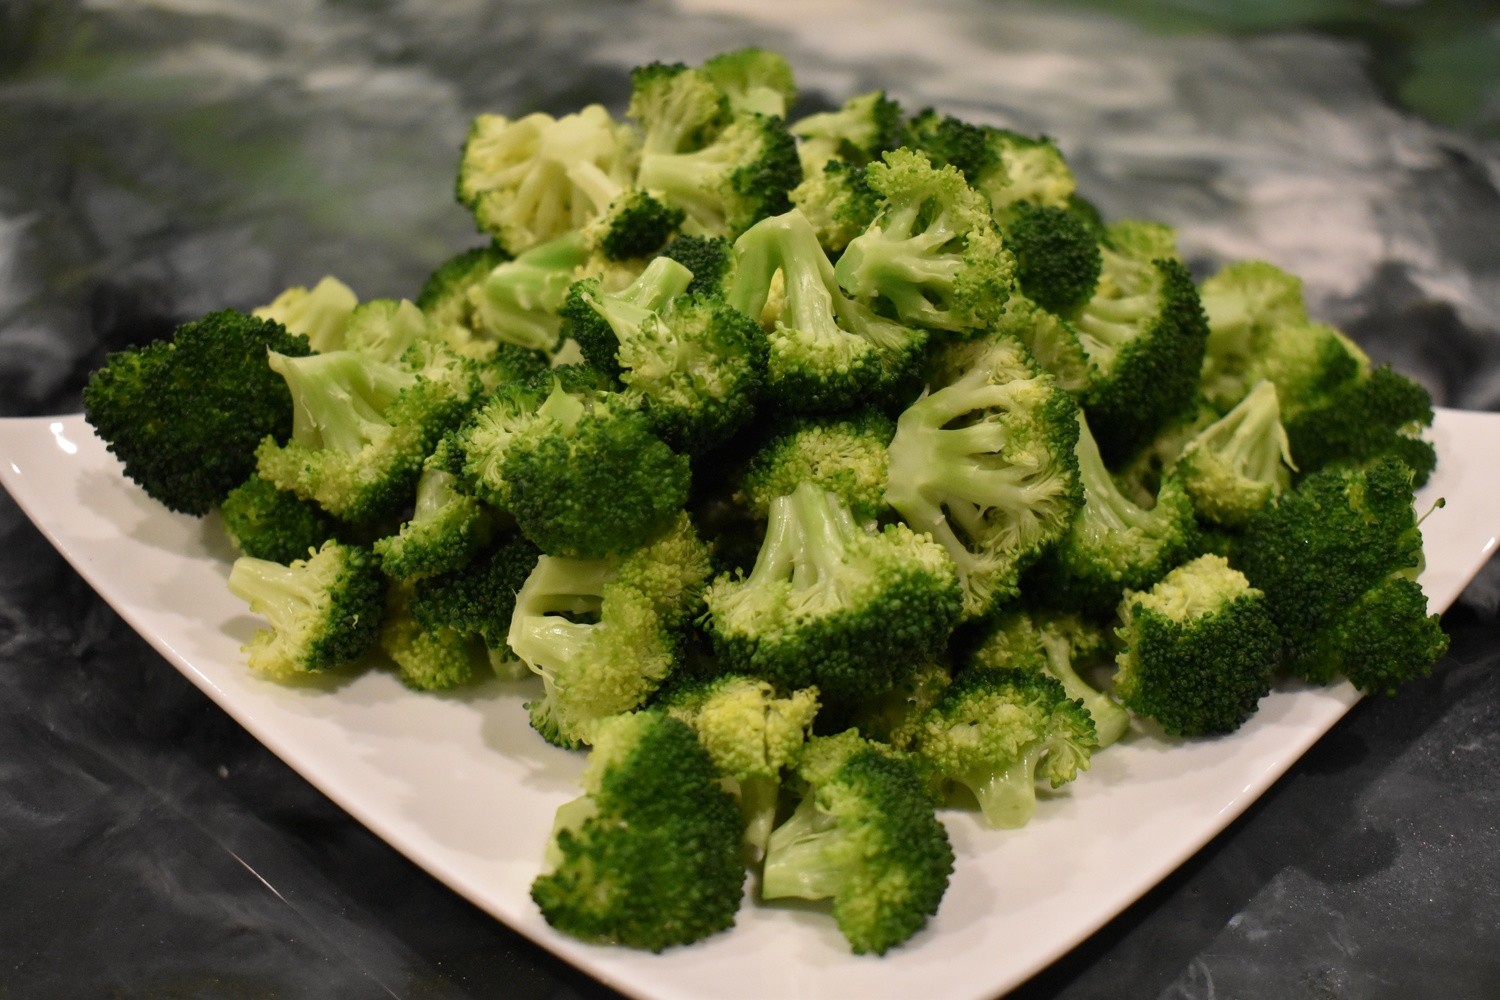 Broccoli- 1 Lb. How Many Cups Is A Pound Of Broccoli